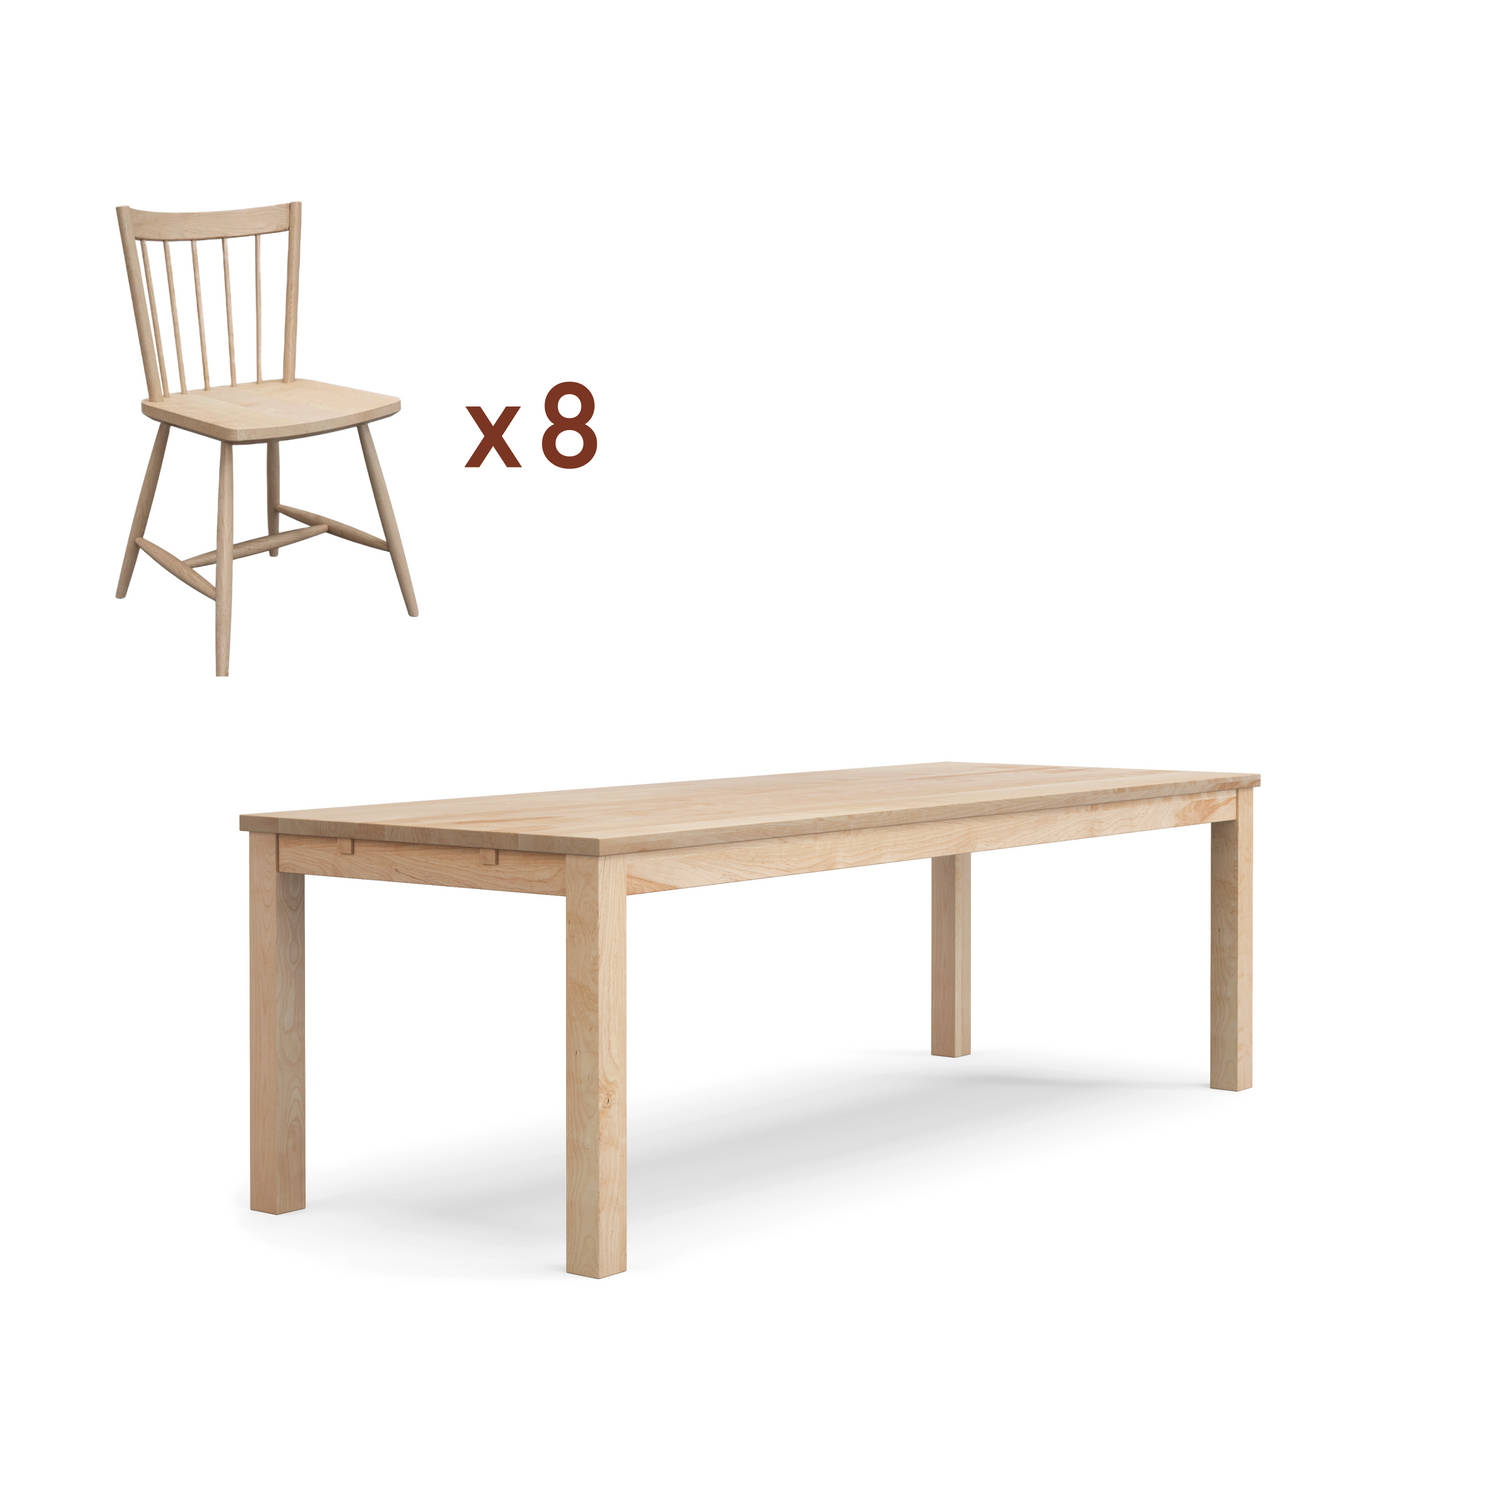 Classic table + chairs bundle